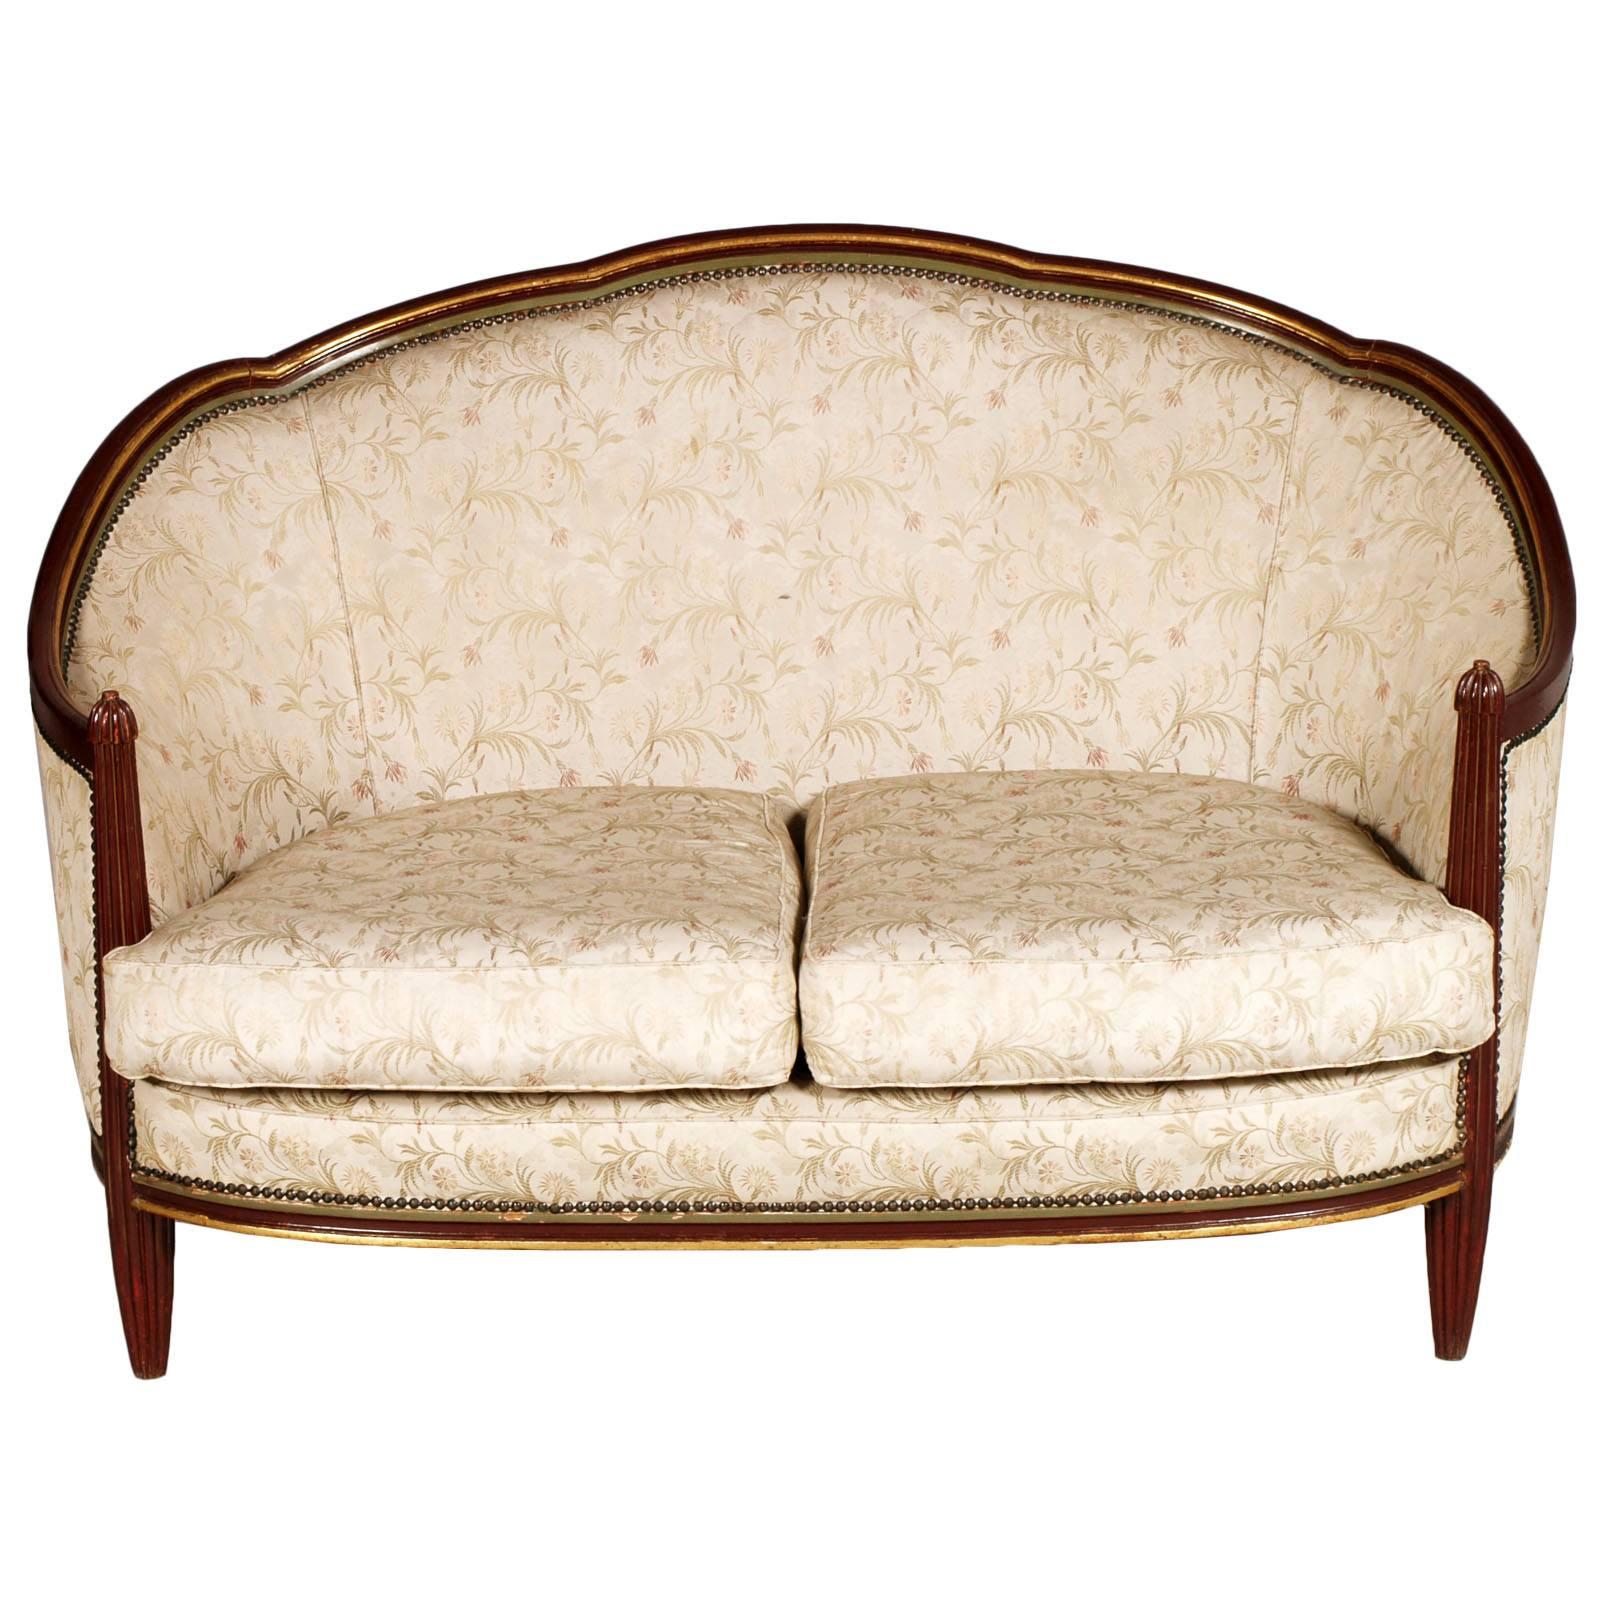 Loveseat Sofa Art Nouveau Belle Époque Lacquered and Gilded Carved Mahogany For Sale